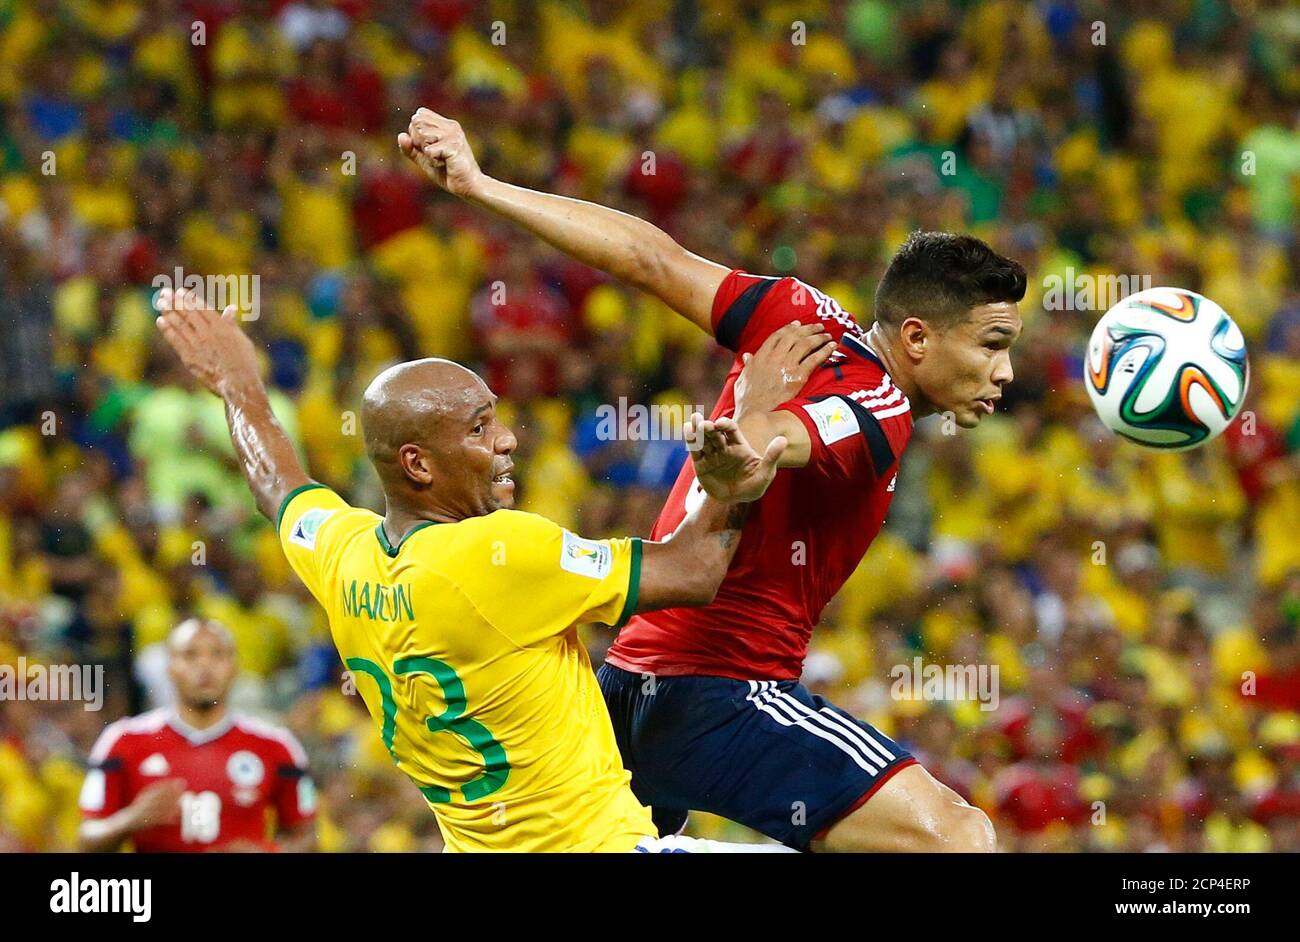 Brazil's Maicon jumps for the ball with Colombia's Teofilo Gutierrez during their 2014 World Cup quarter-finals at the Castelao arena in Fortaleza July 4, 2014. REUTERS/Stefano Rellandini (BRAZIL  - Tags: SOCCER SPORT WORLD CUP) Stock Photo